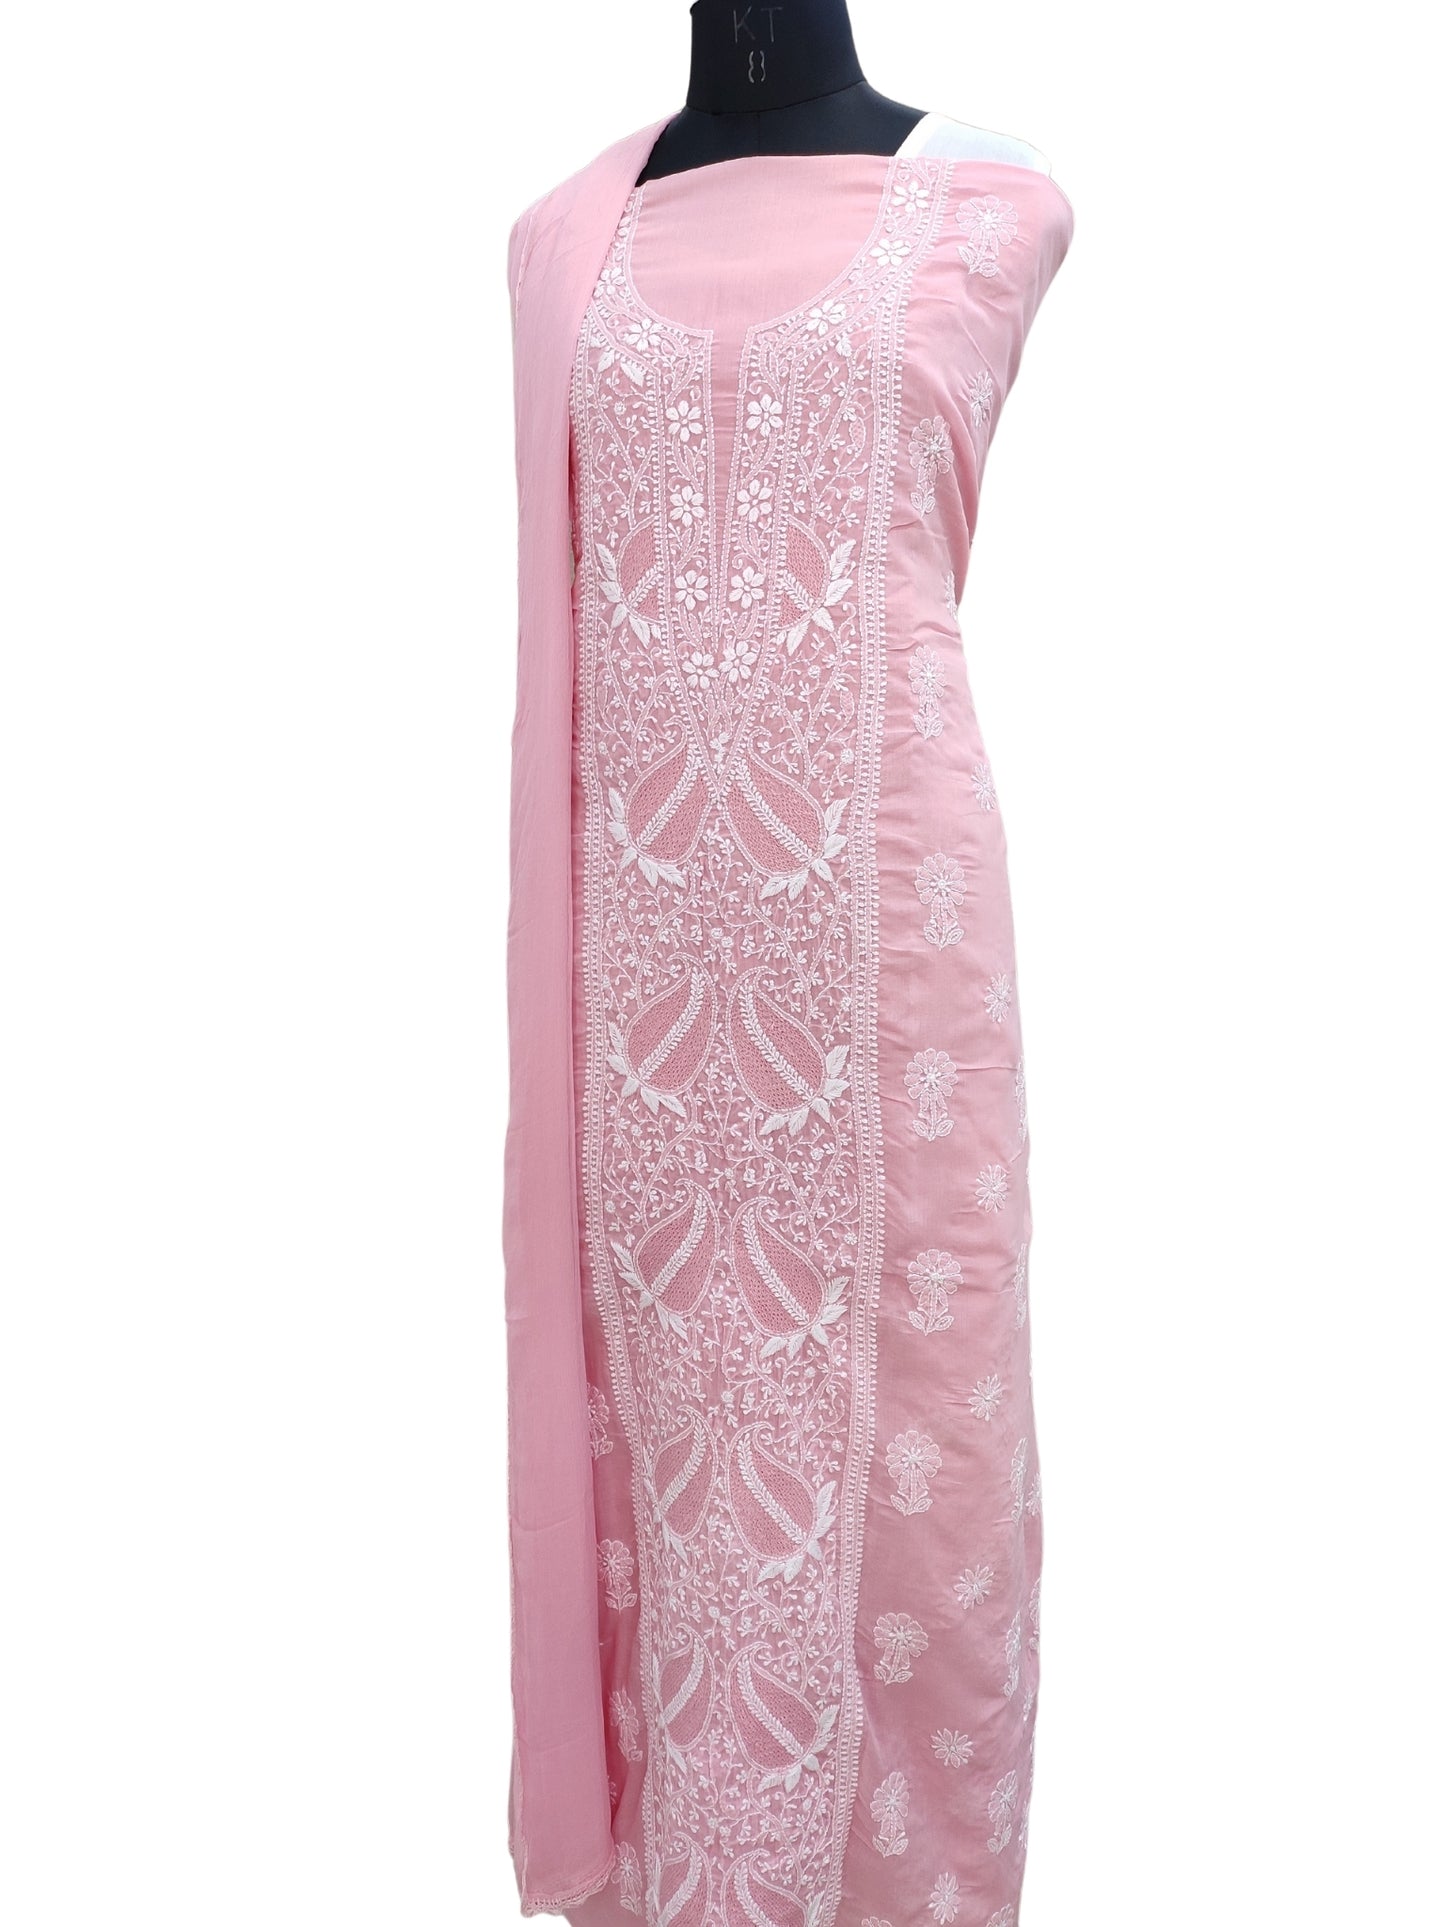 Shyamal Chikan Hand Embroidered Pink Cotton Lucknowi Chikankari Unstitched Suit Piece With Jaali Work- S22217